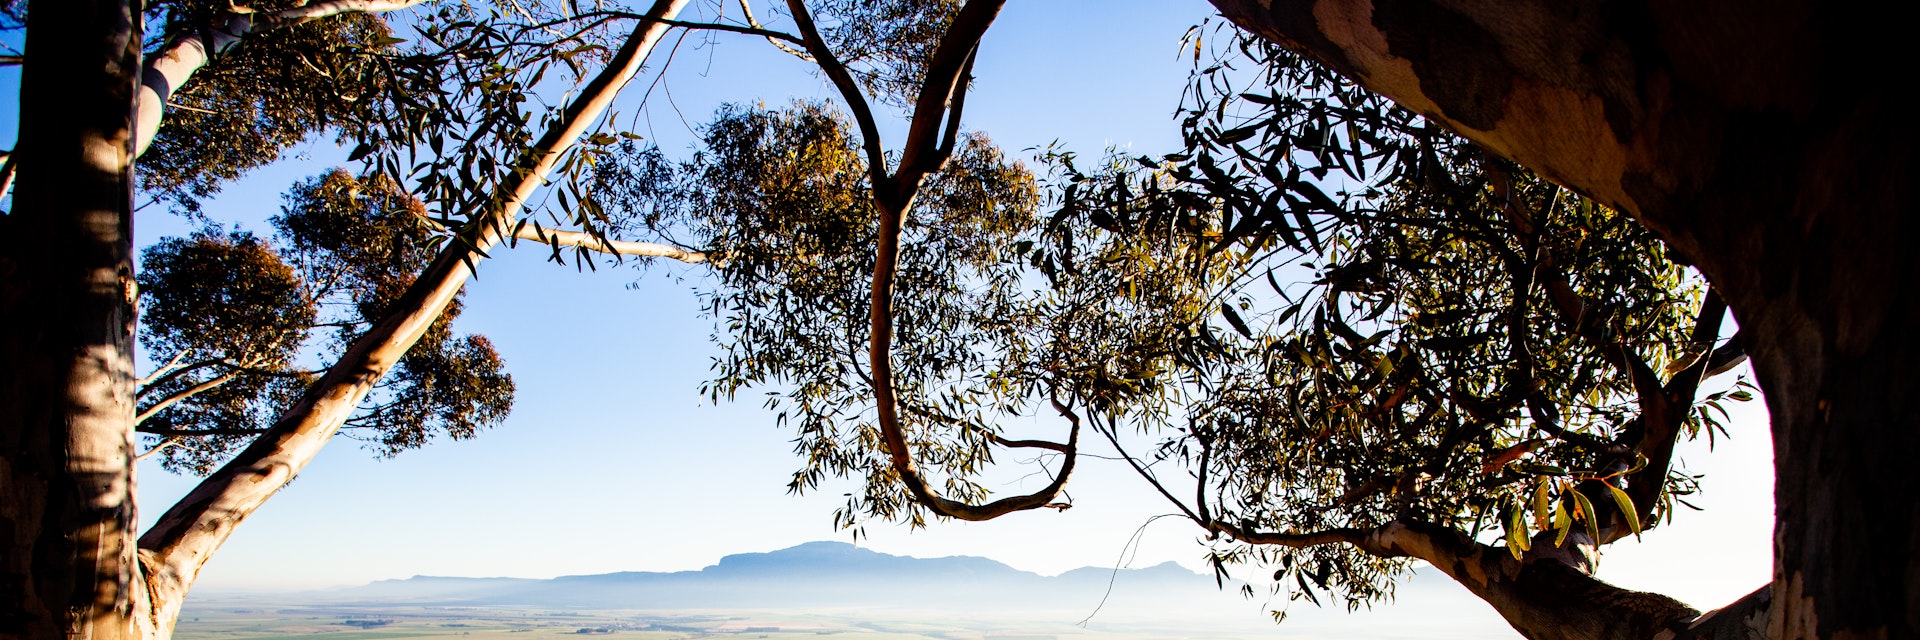 A panoramic view, framed by eucalyptus trees, of spring farmland in the Swartland region of South Africa. Picture taken from an elevated position.